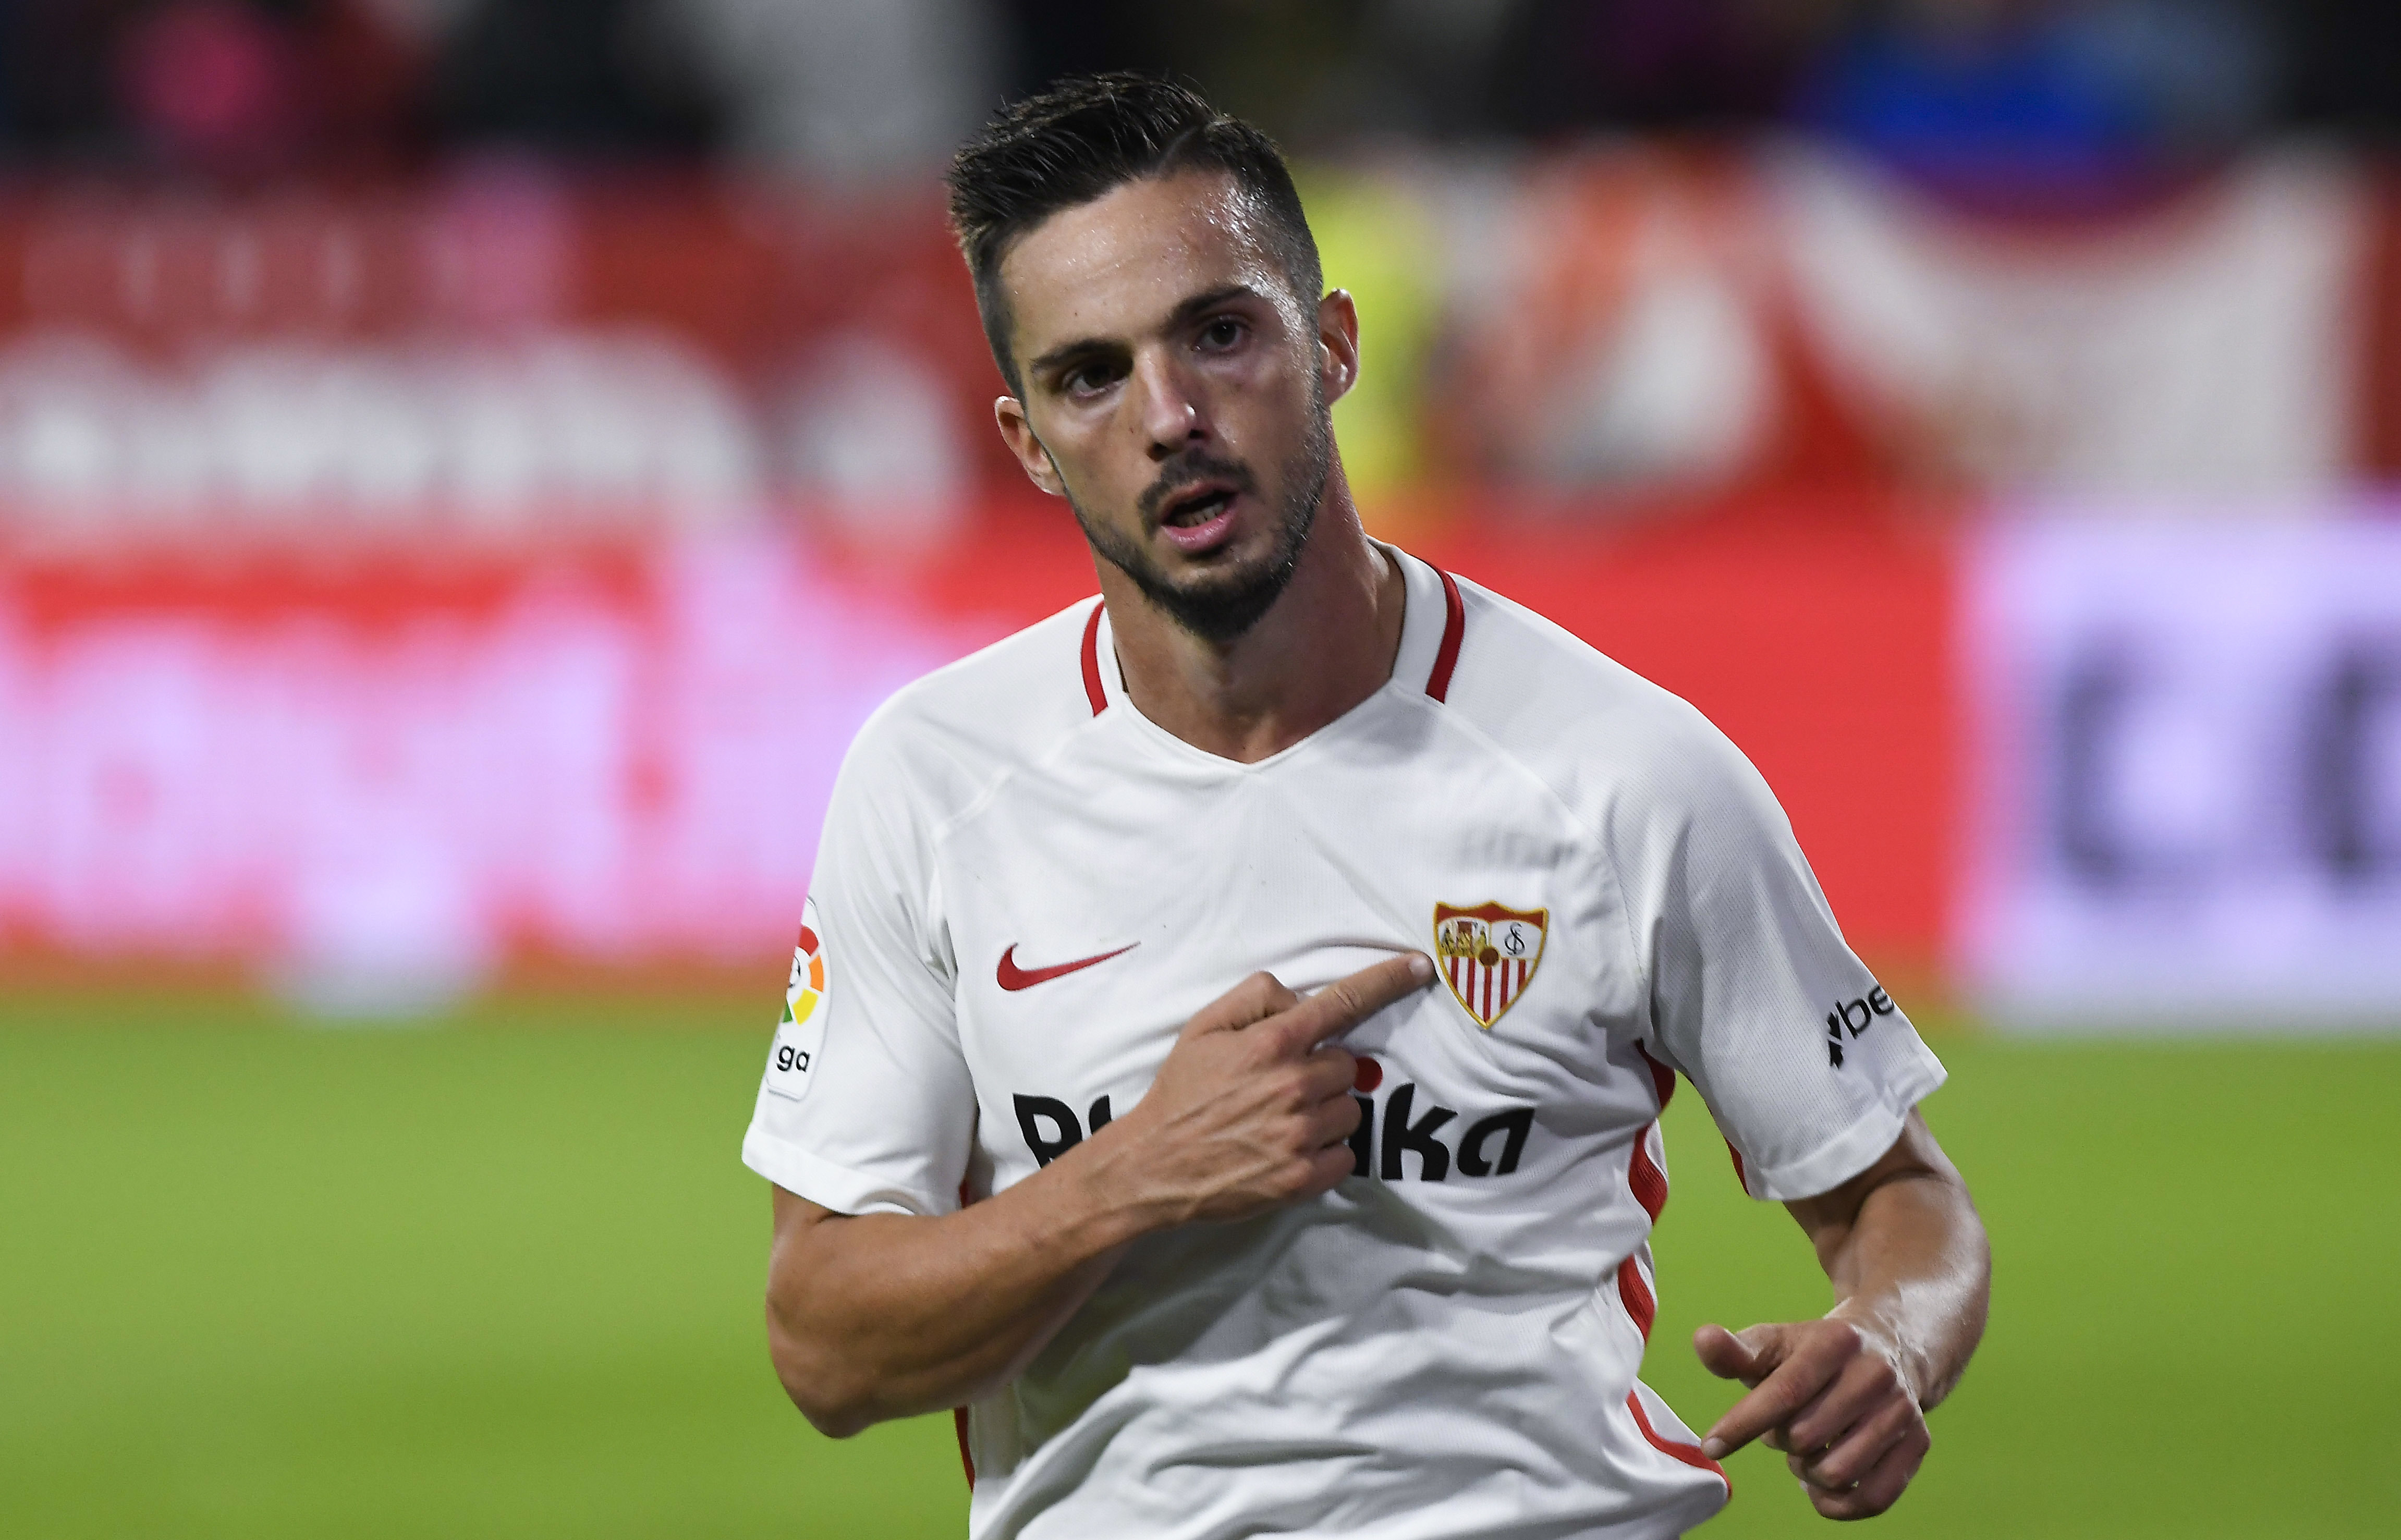 Pablo Sarabia celebrates during the Liga match between Sevilla and Huesca on October 28th, 2018.
Photo: Marca / Icon Sport